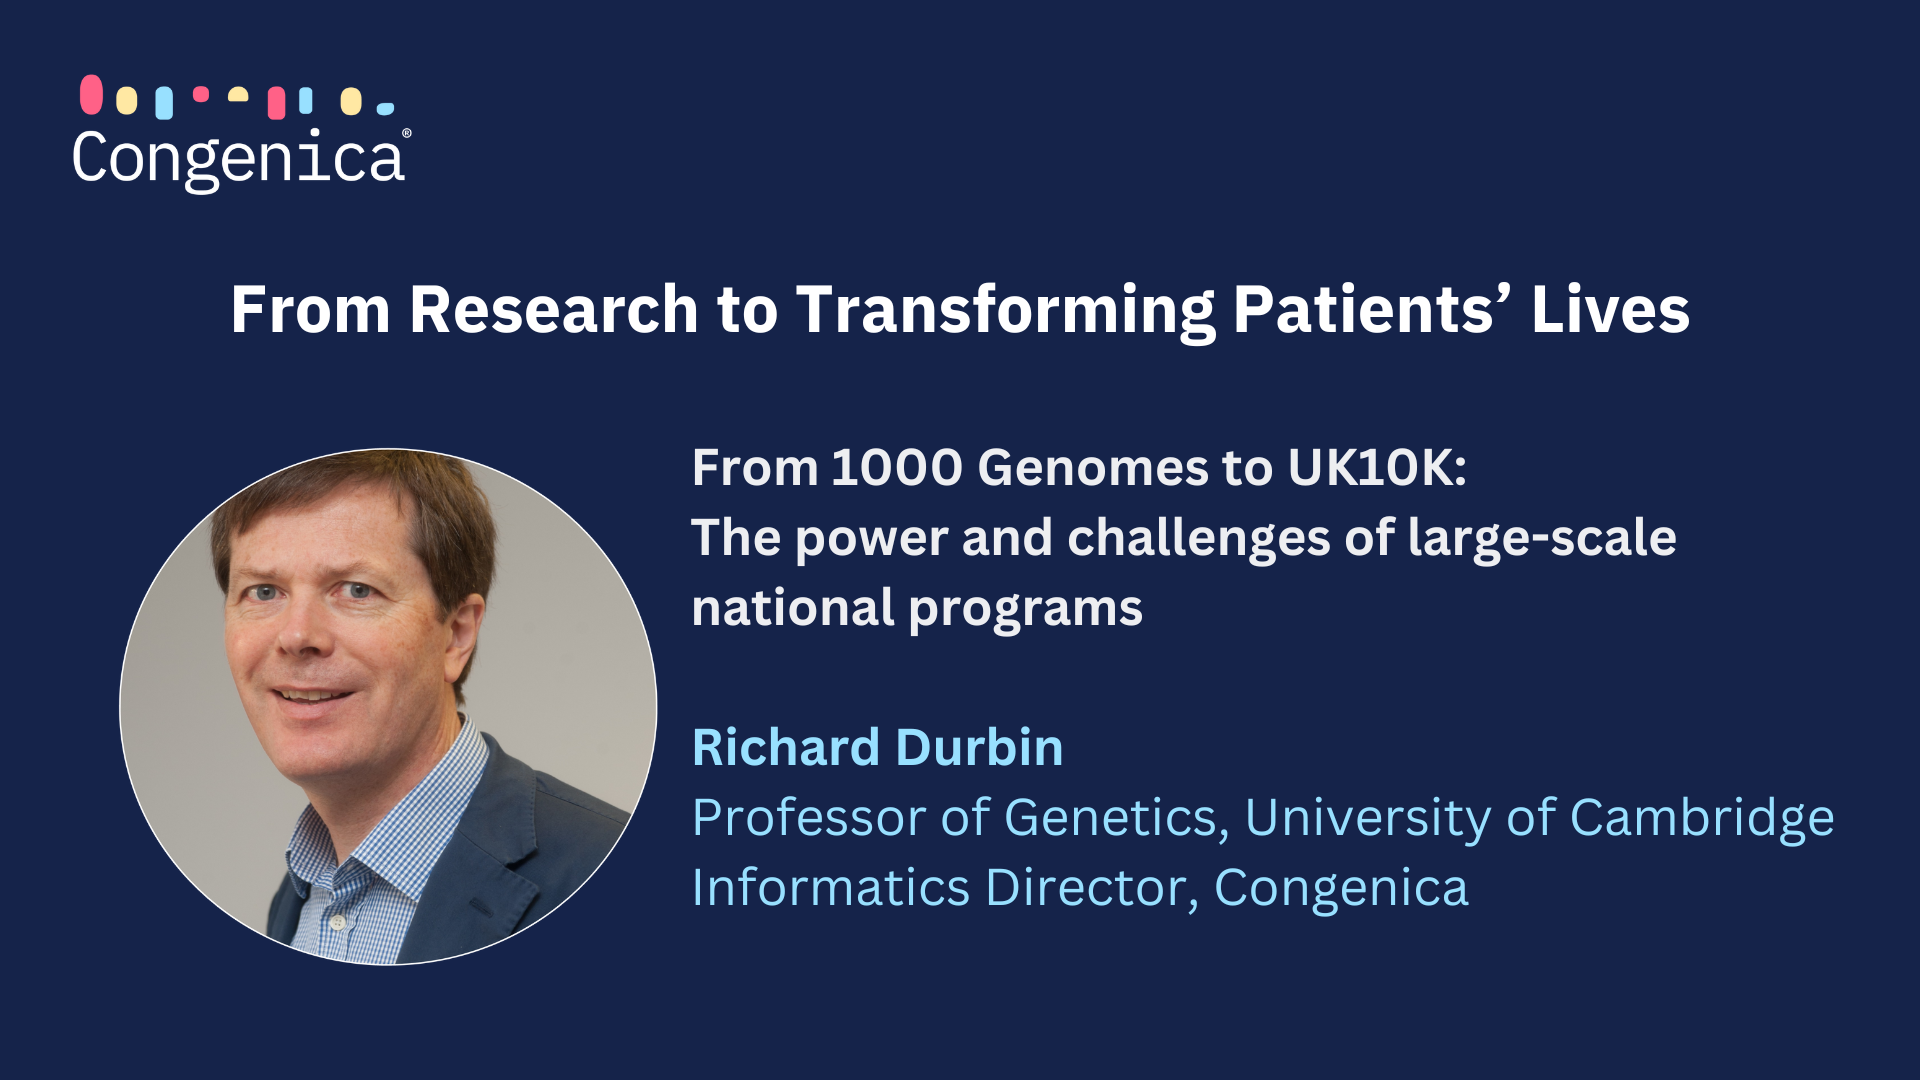 From 1000 Genomes to UK10K The power and challenges of large-scale national programs Richard Durbin, Professor of Genetics at University of Cambridge and Informatics Director at Congenica (1920 × 1080 px) (2)